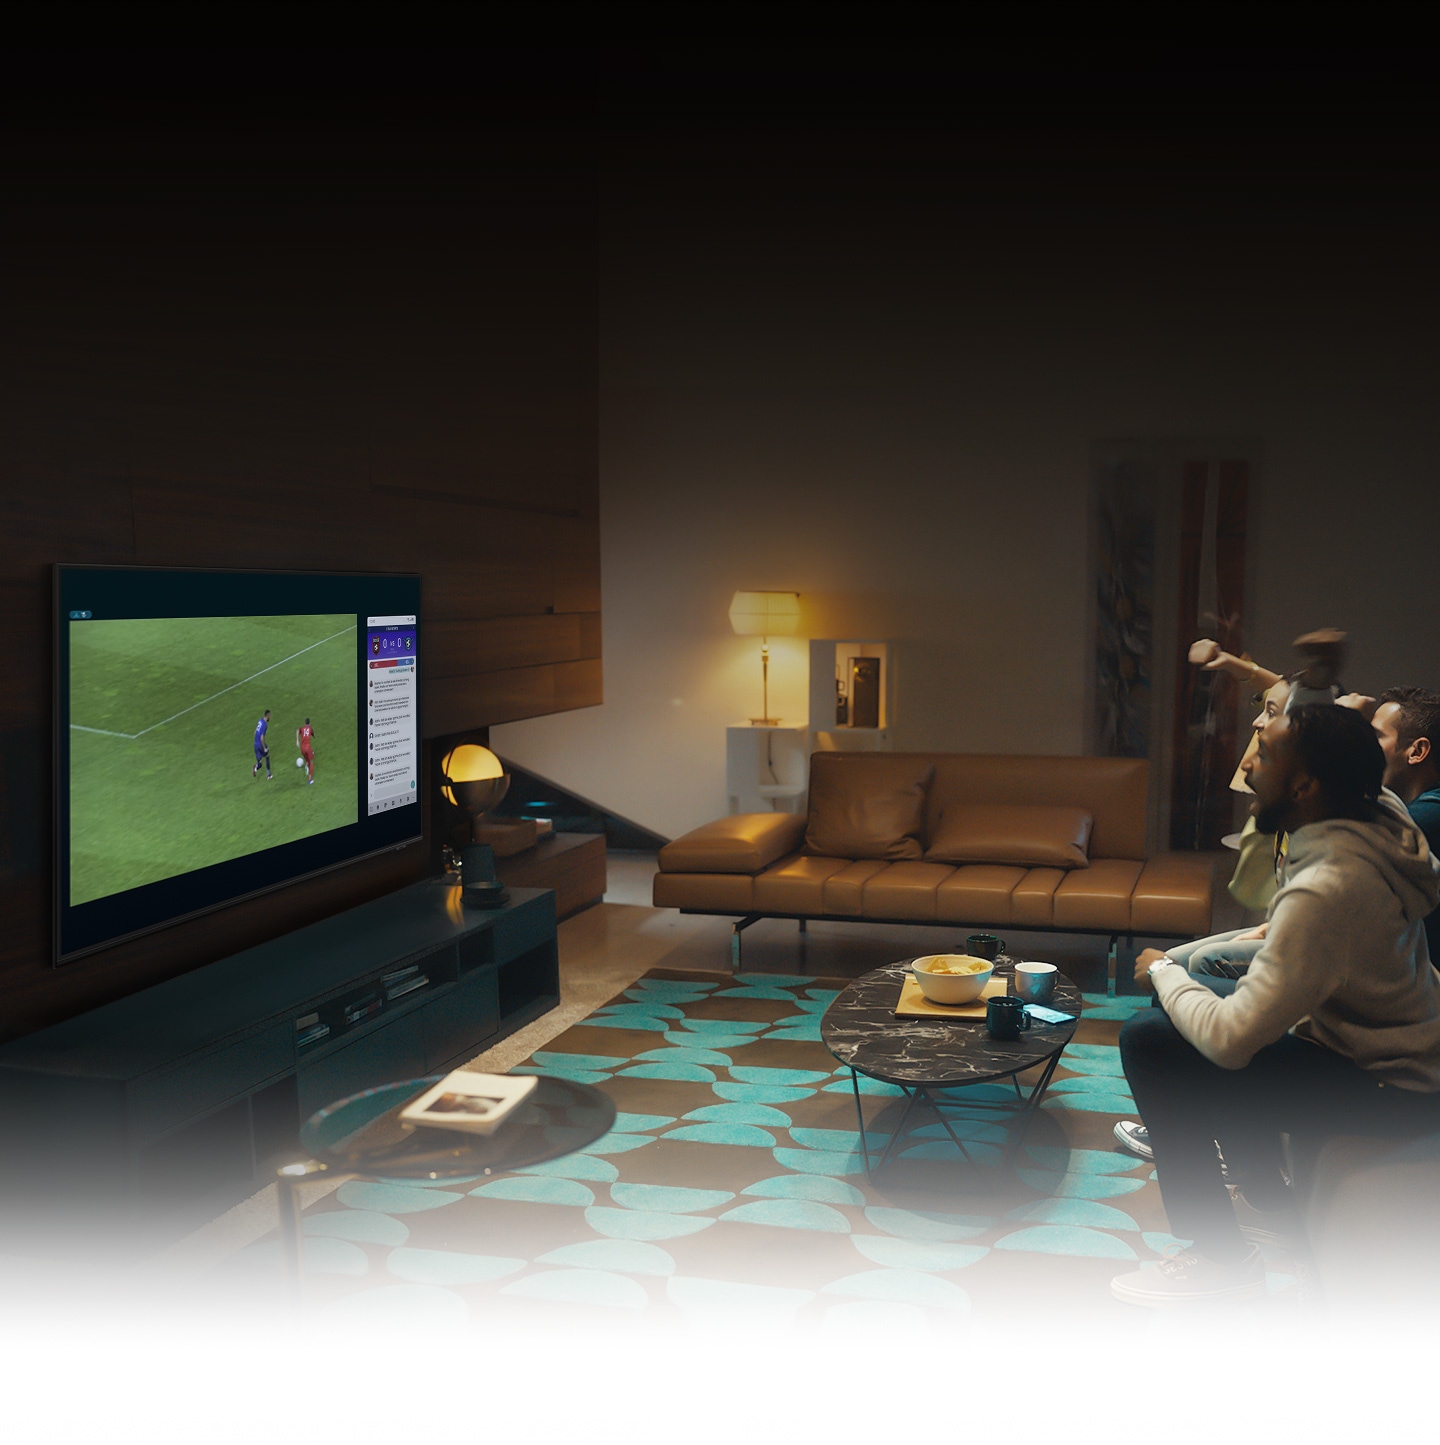 A group of people use UHD TV Multi view feature to enjoy a football match and view play-by-play information at the same time on the same screen.